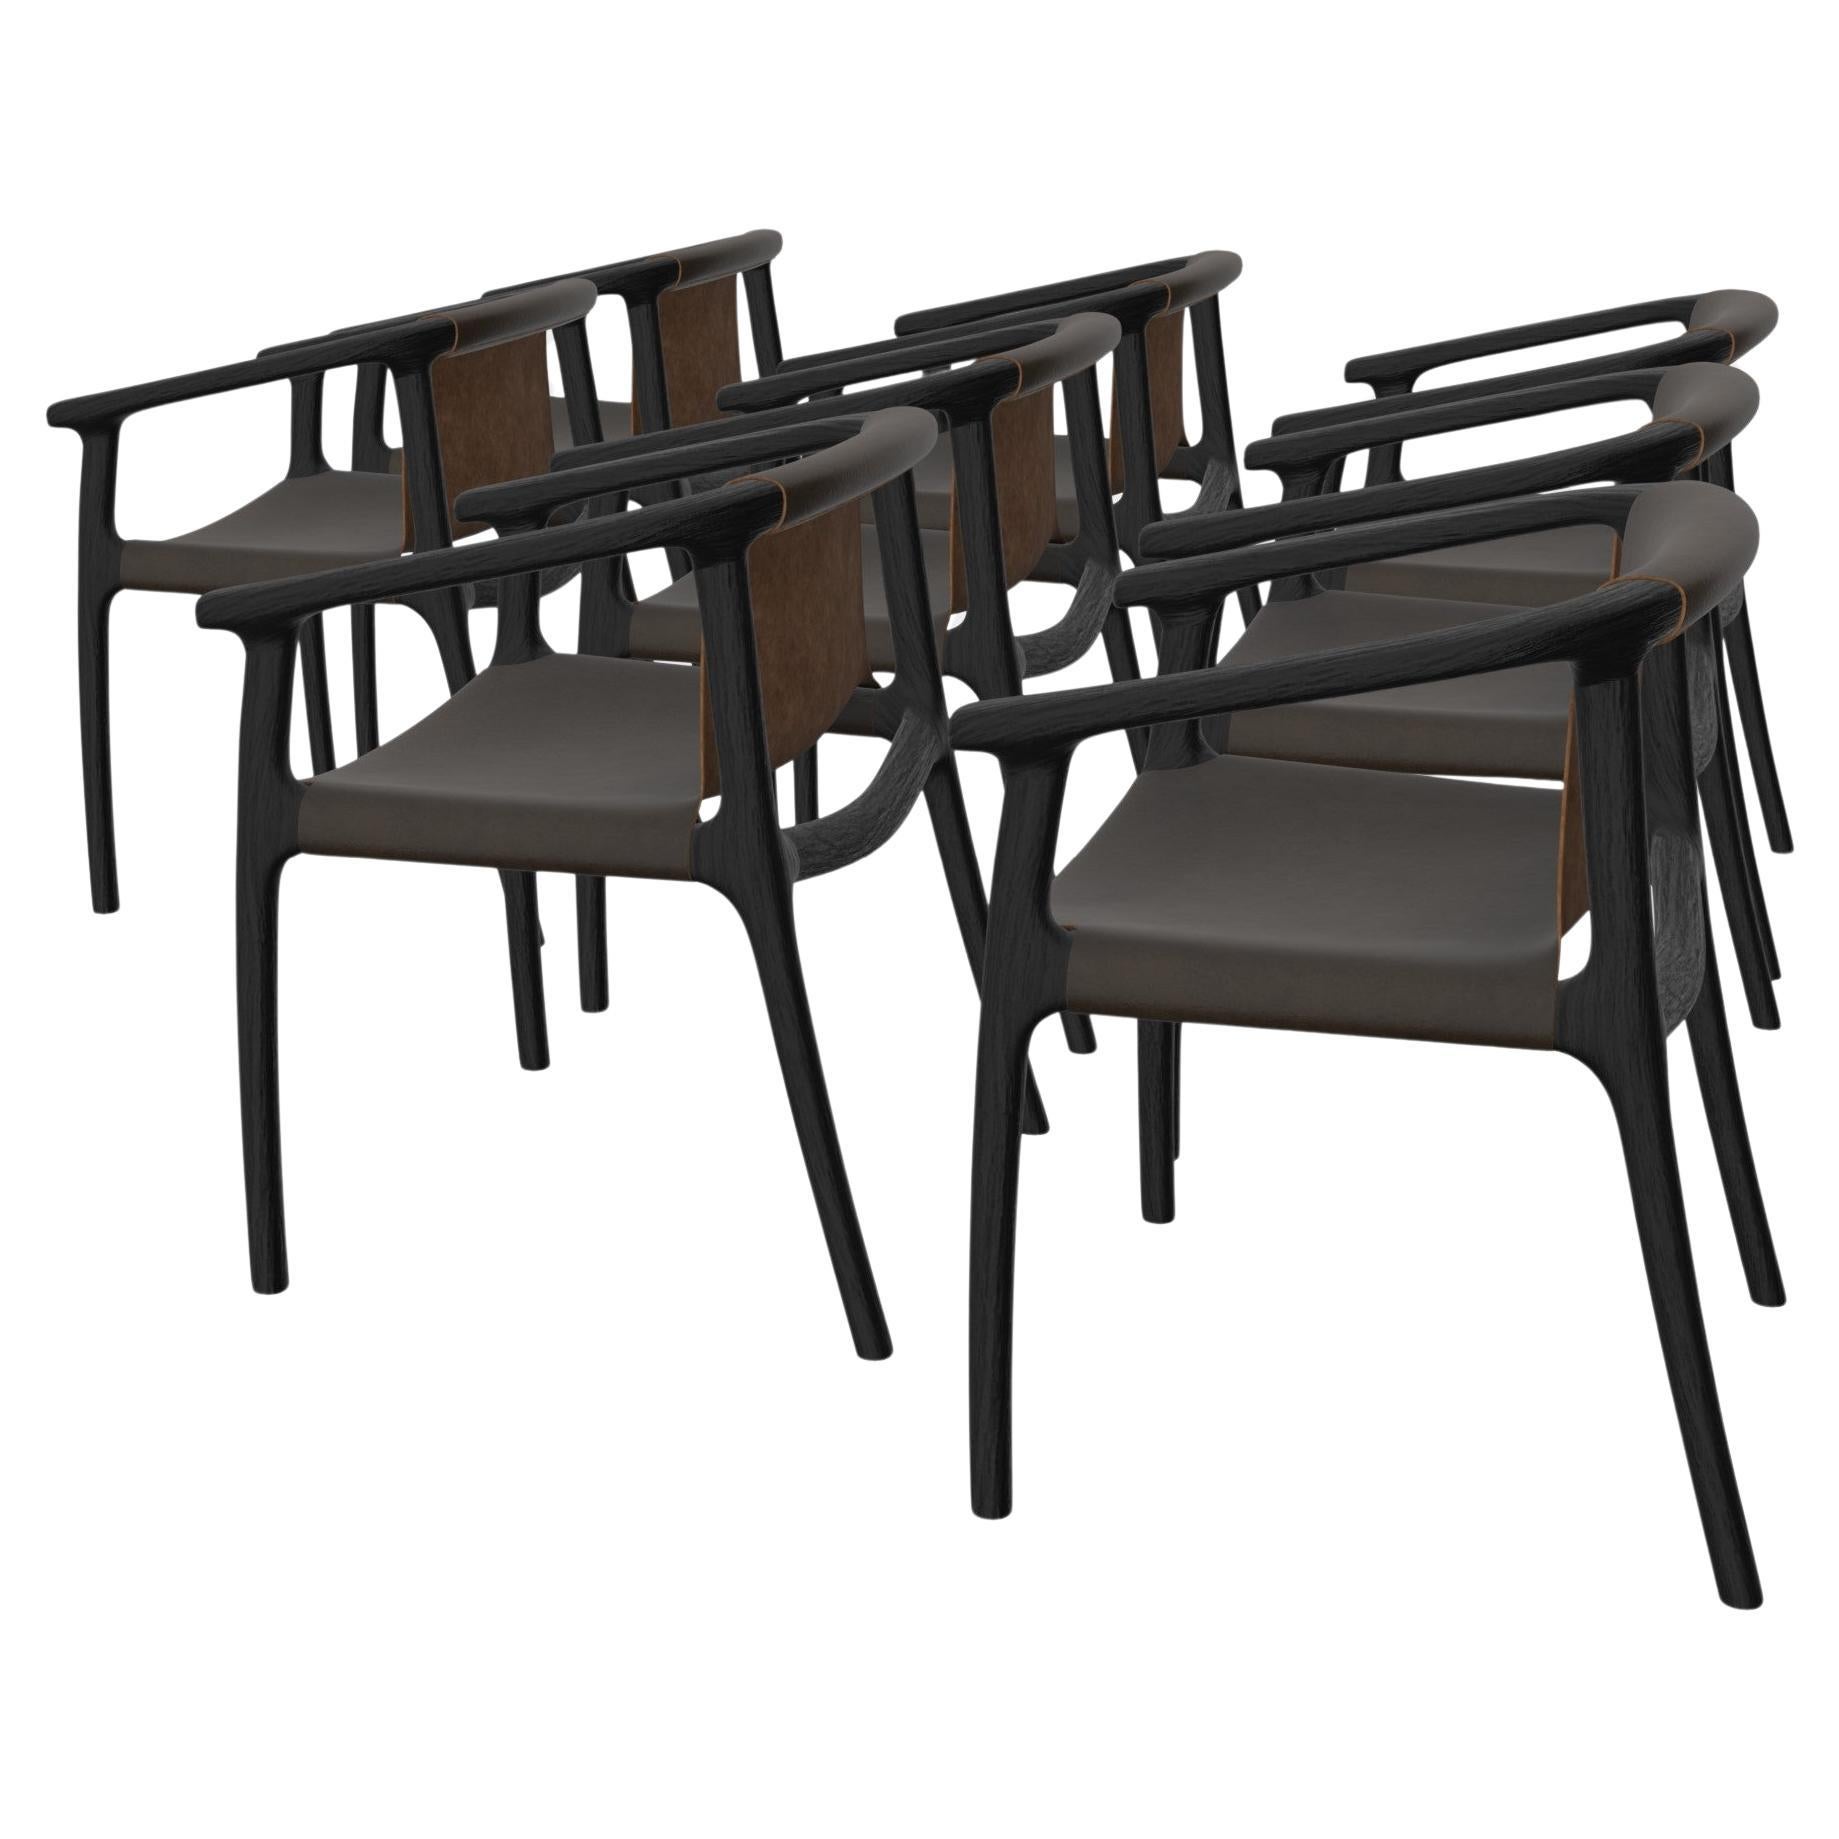 Tusk sling dining chair by Möbius Objects - hand-sculpted in solid American Ash in a black stain. Raked legs offer a unique 'wind-swept' silhouette. The veg-tan leather sling is ergonomically wrapped with contact points padded in high-density